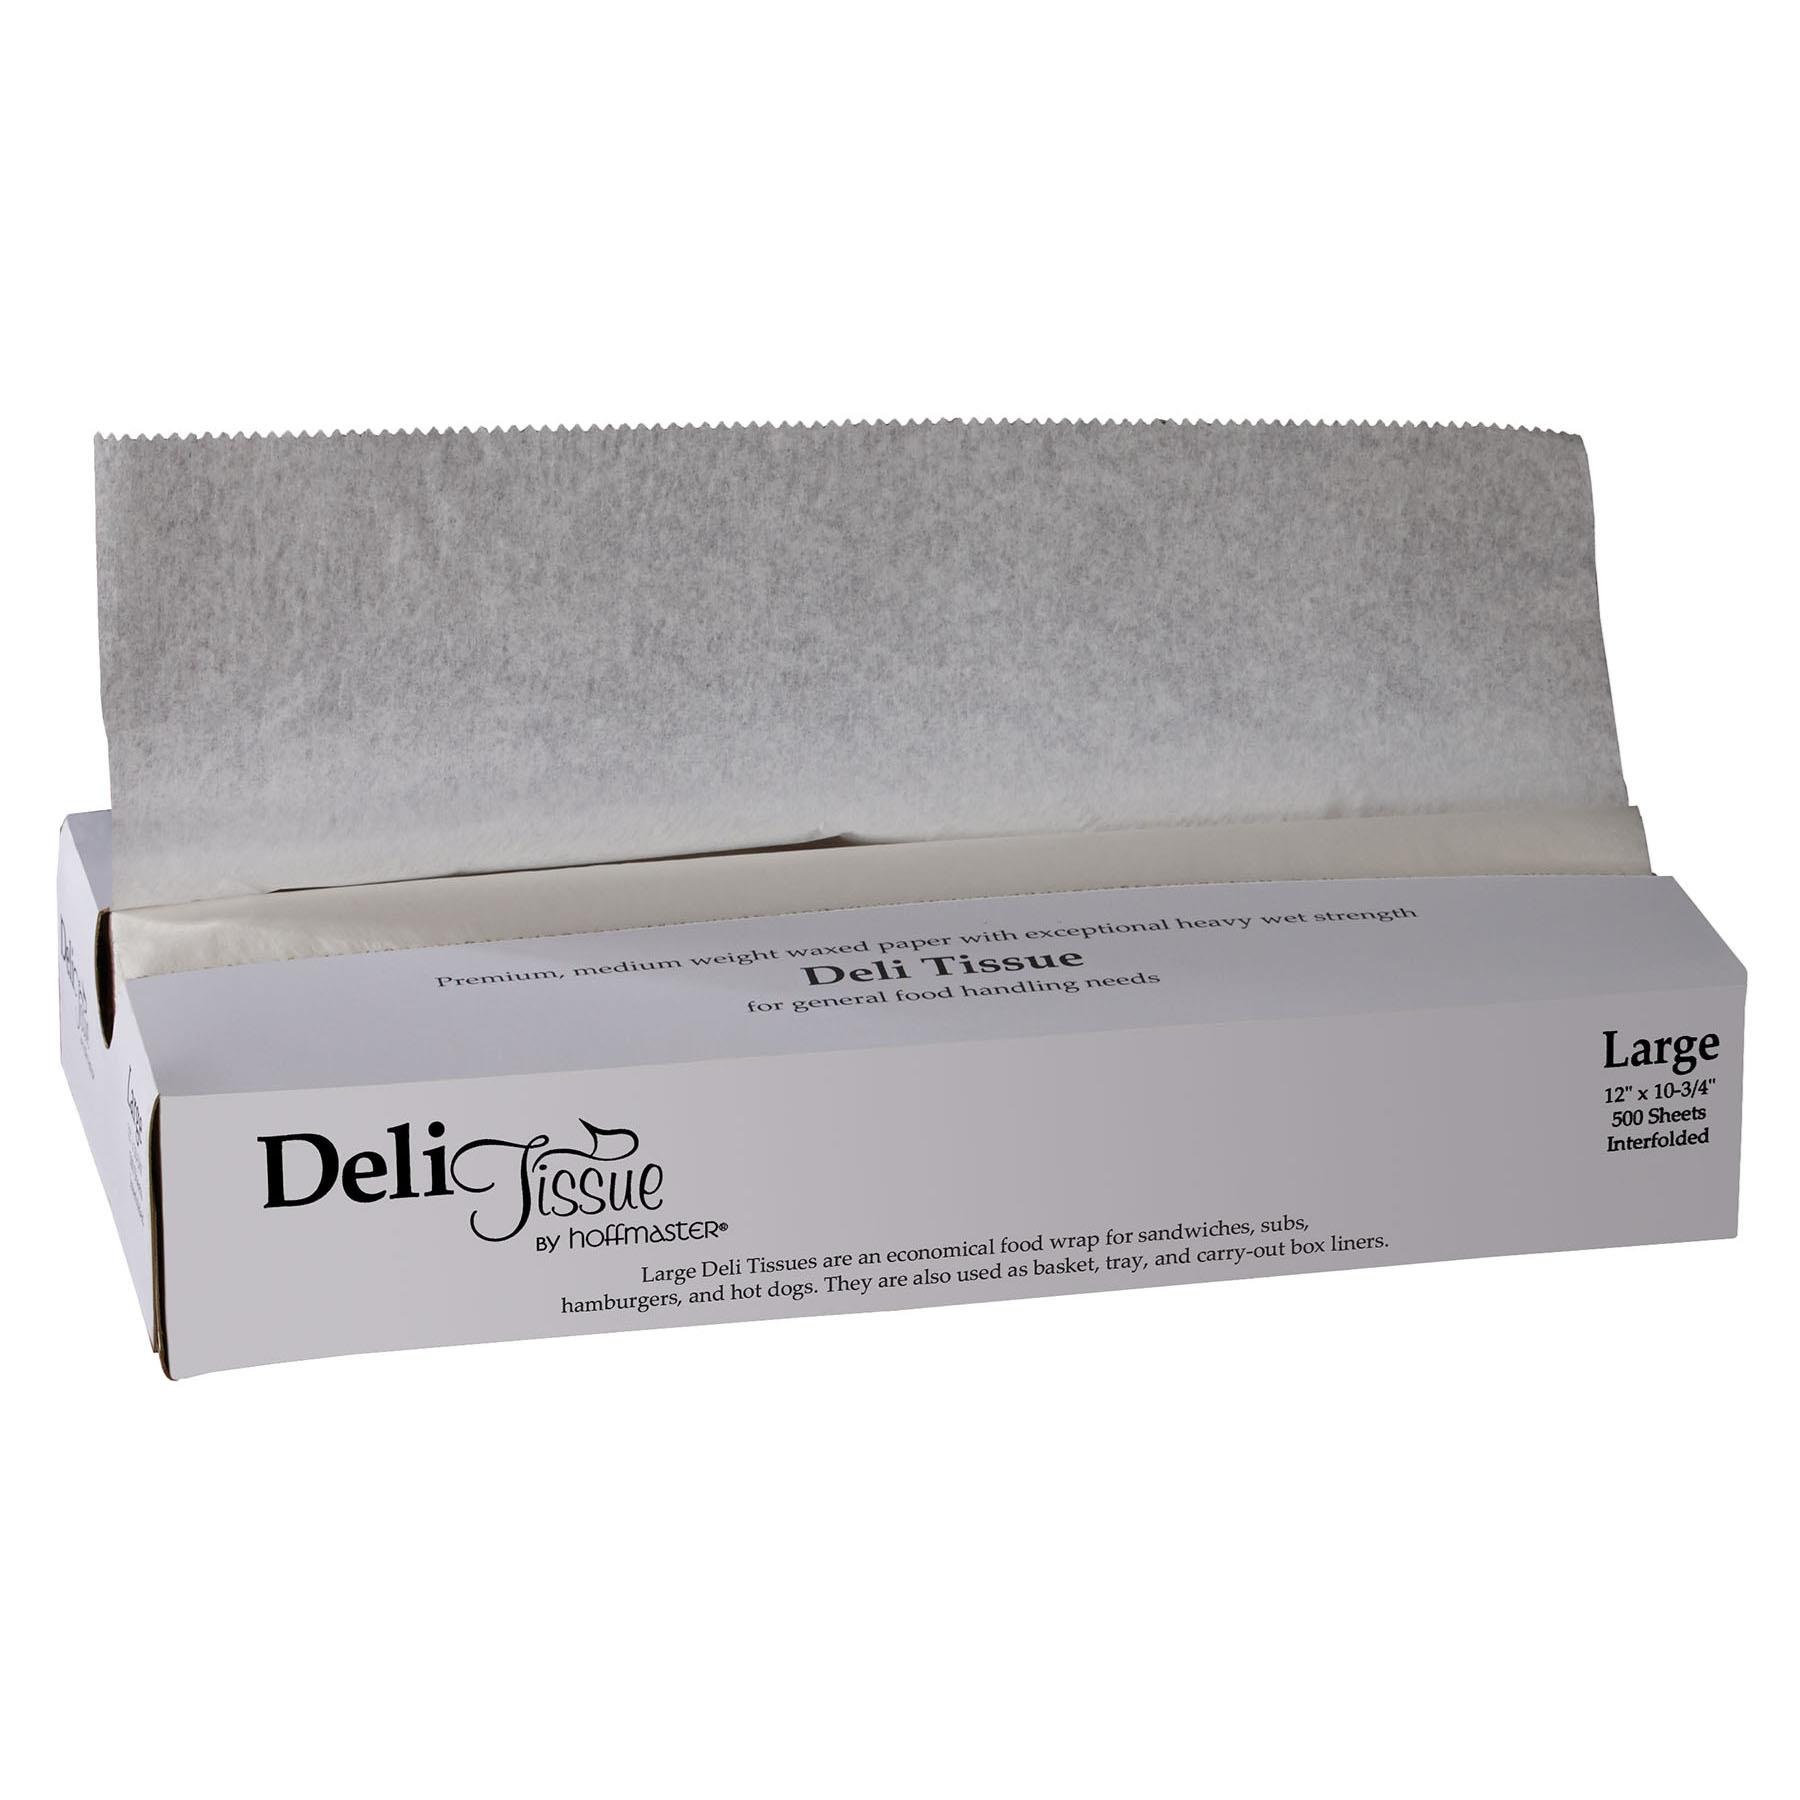 WRAP UP LARGE 12 INTERFOLDED REGULAR WAXED DELI PAPER 12x10-3/4